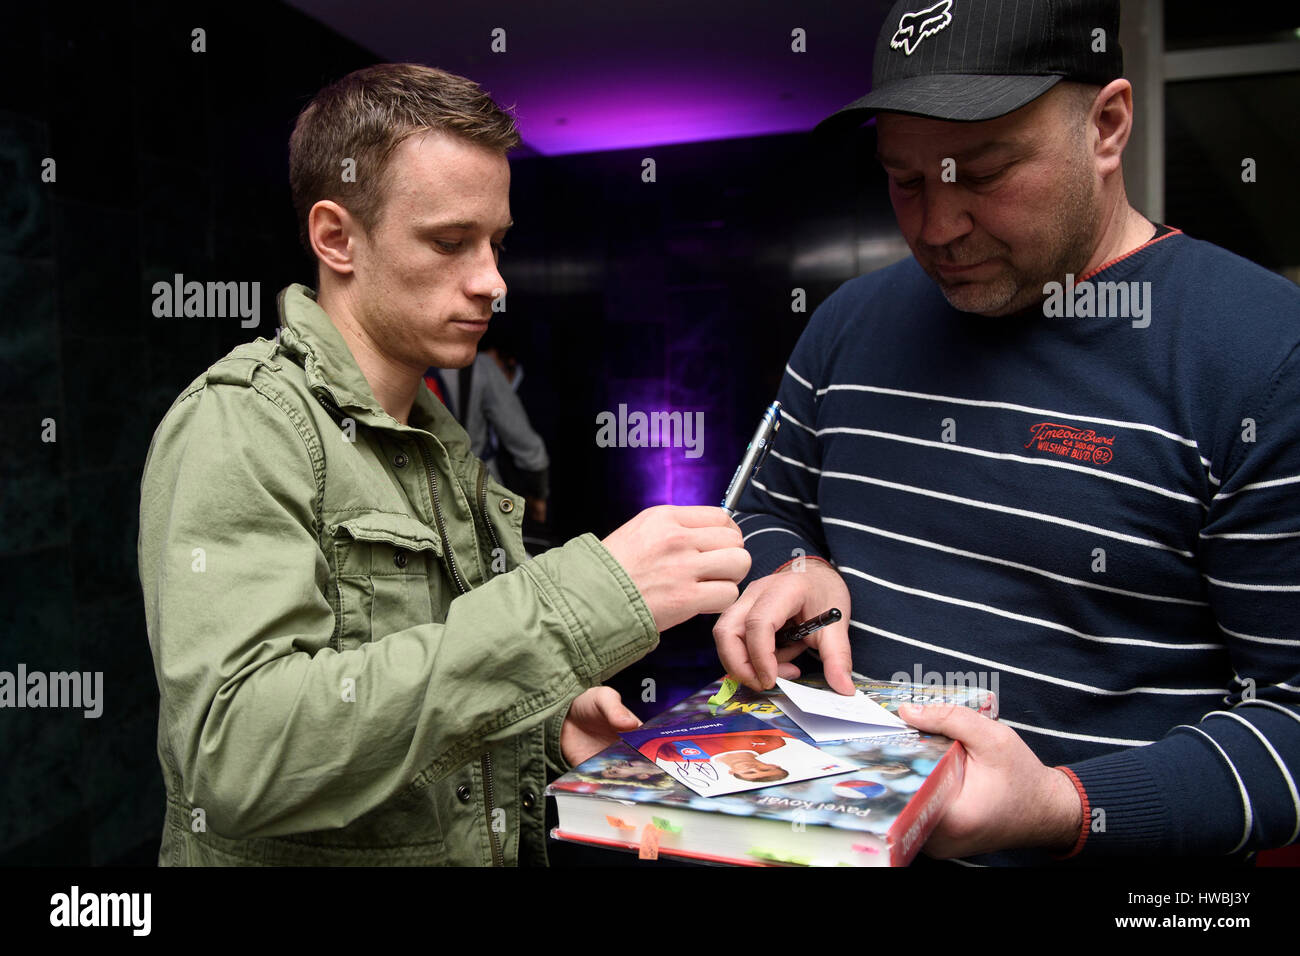 Palyer Jan Sykora gives an autograph to a fan as he arrives to Czech national soccer meeting prior to the friendly match Czech Republic vs Lithuania and World Cup qualification in San Marino, in Prague, Czech Republic, on Monday, March 20, 2017. (CTK Photo/Michal Kamaryt) Stock Photo